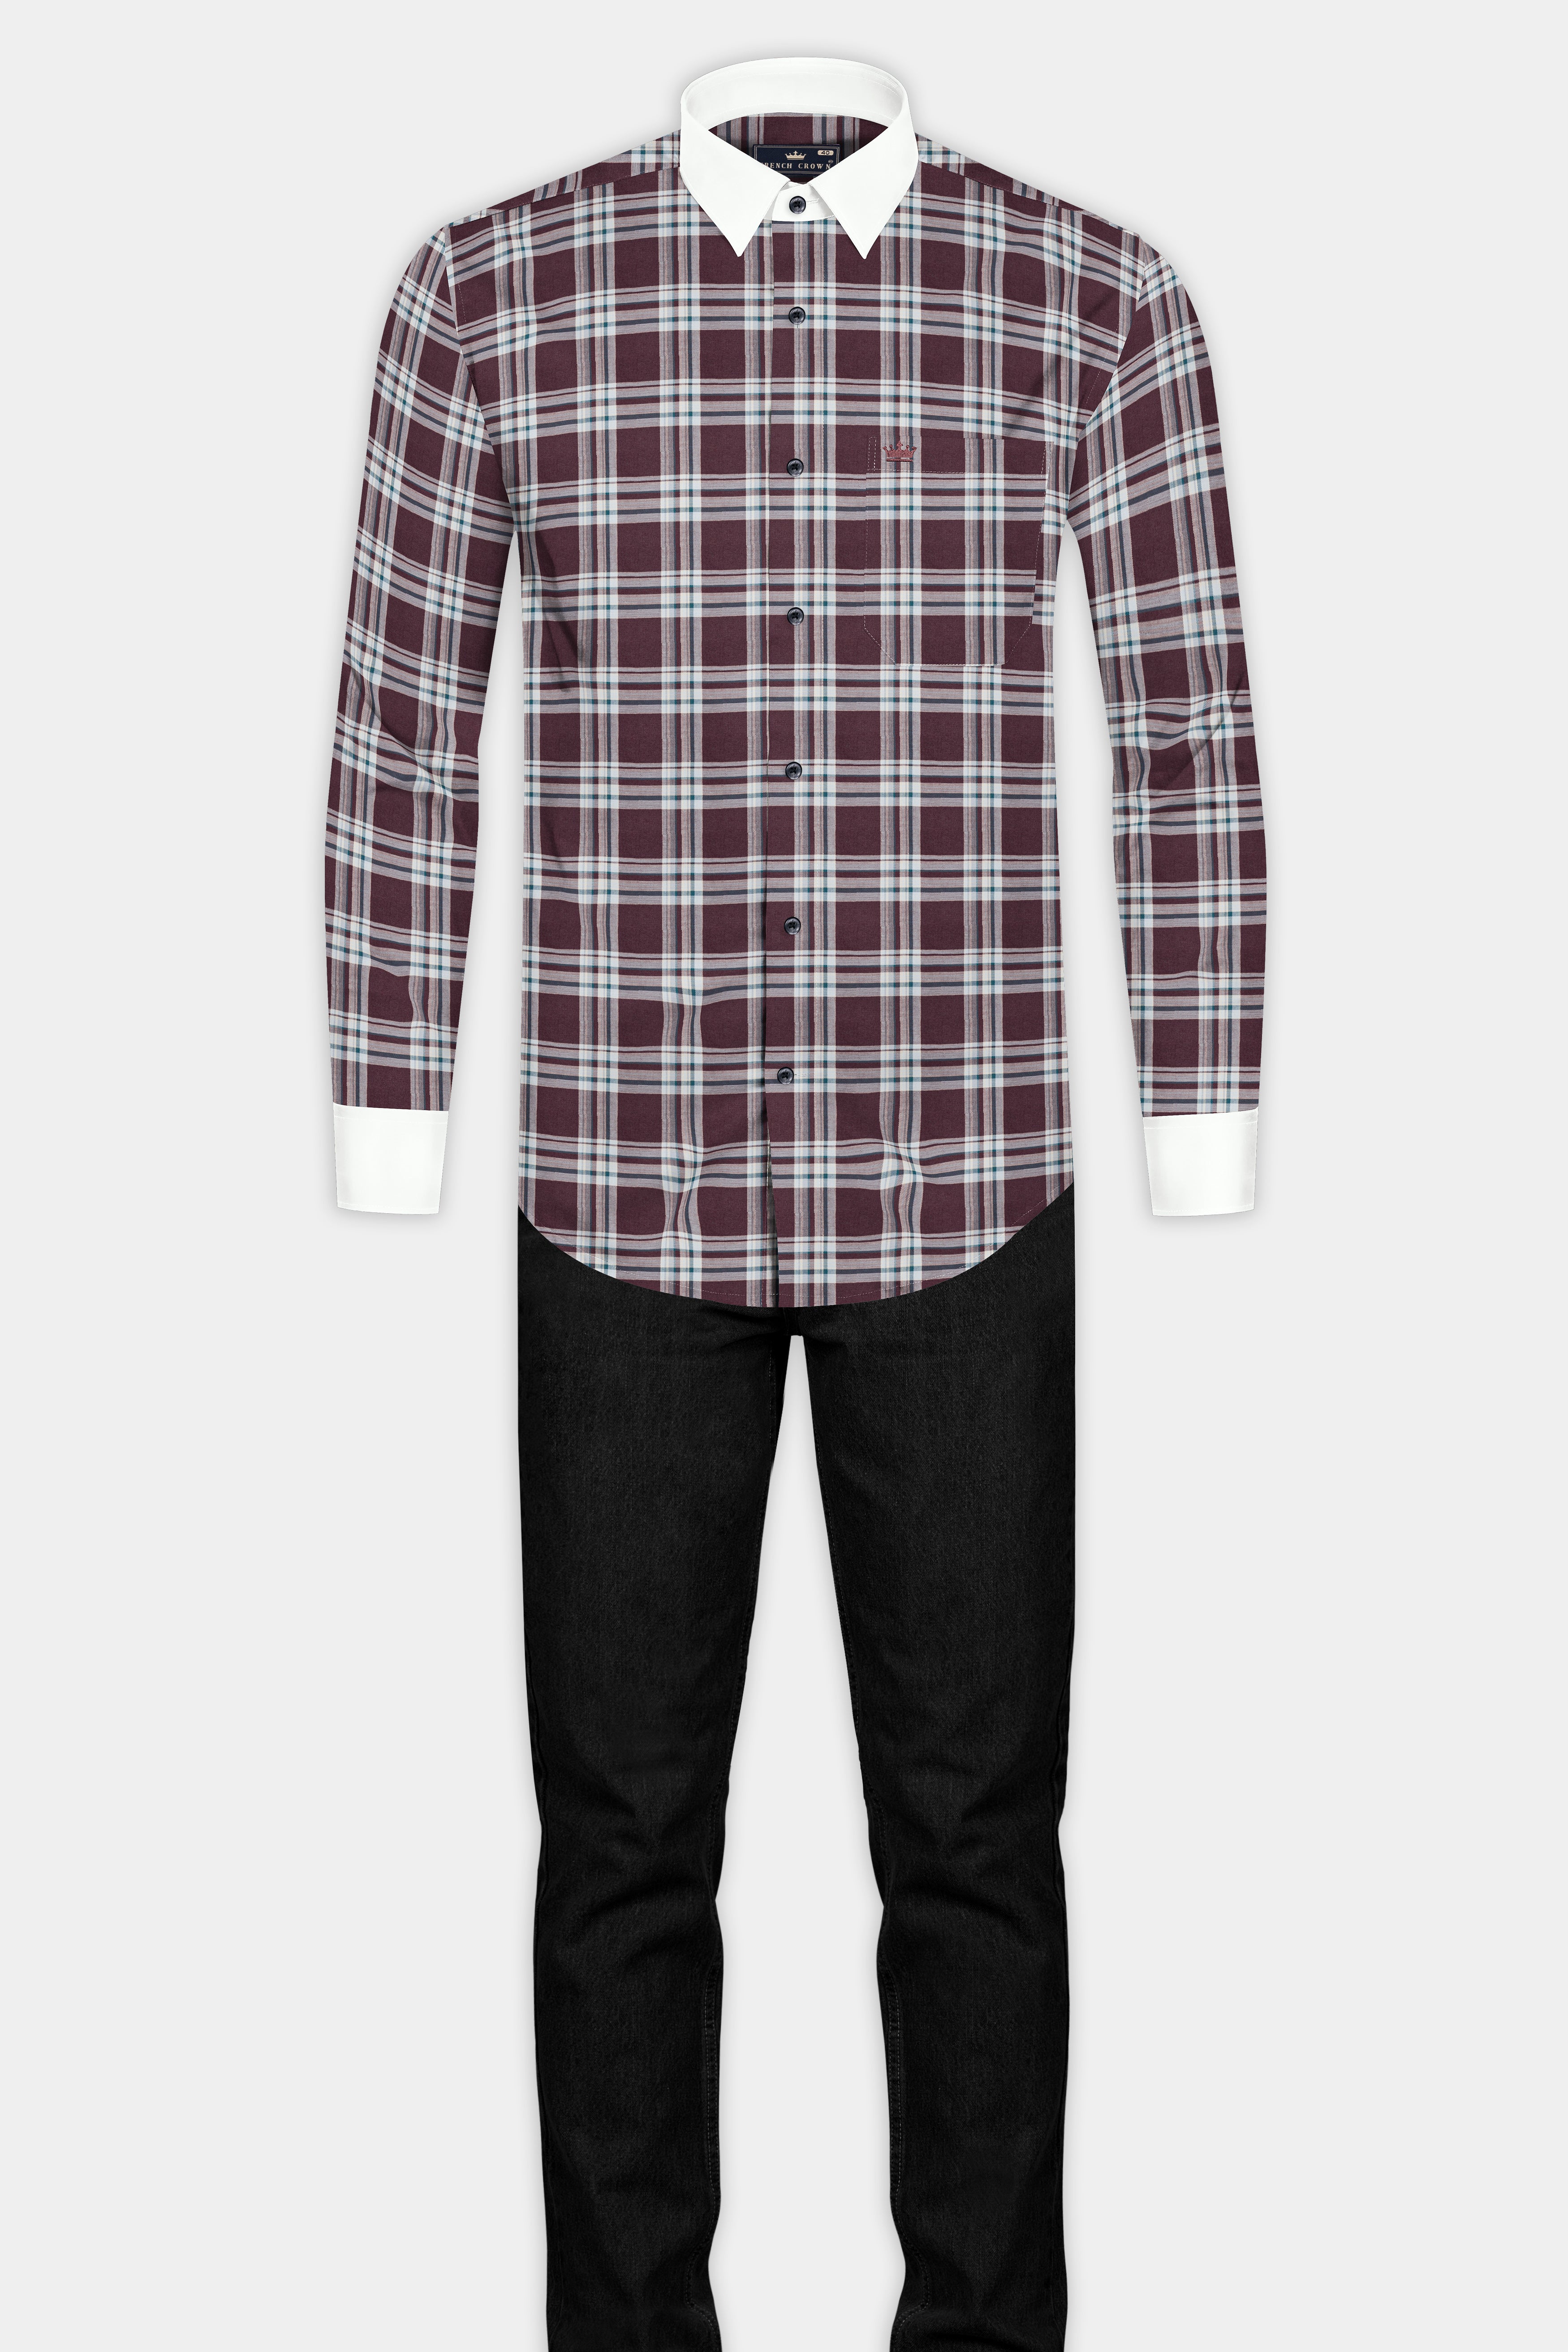 Thunder Brown with White Plaid Twill Cotton Shirt